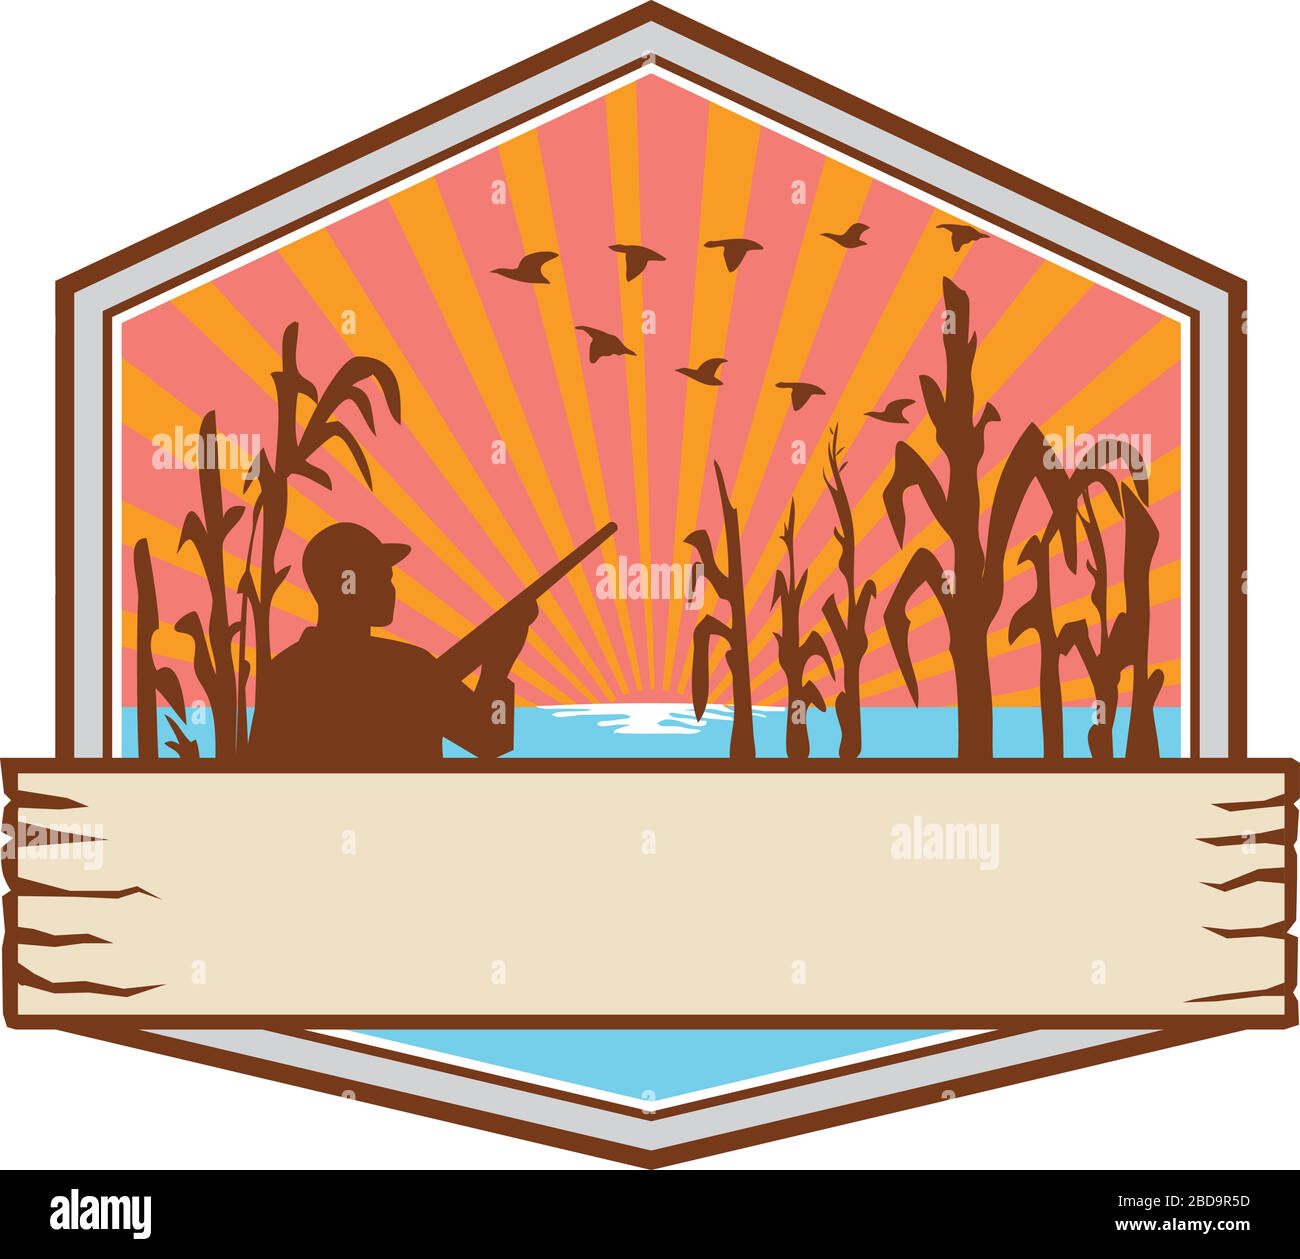 Retro style illustration of a duck or bird hunter with rifle in flooded cornfield with corn stalks set inside crest, shield or badge with sunburst on Stock Vector